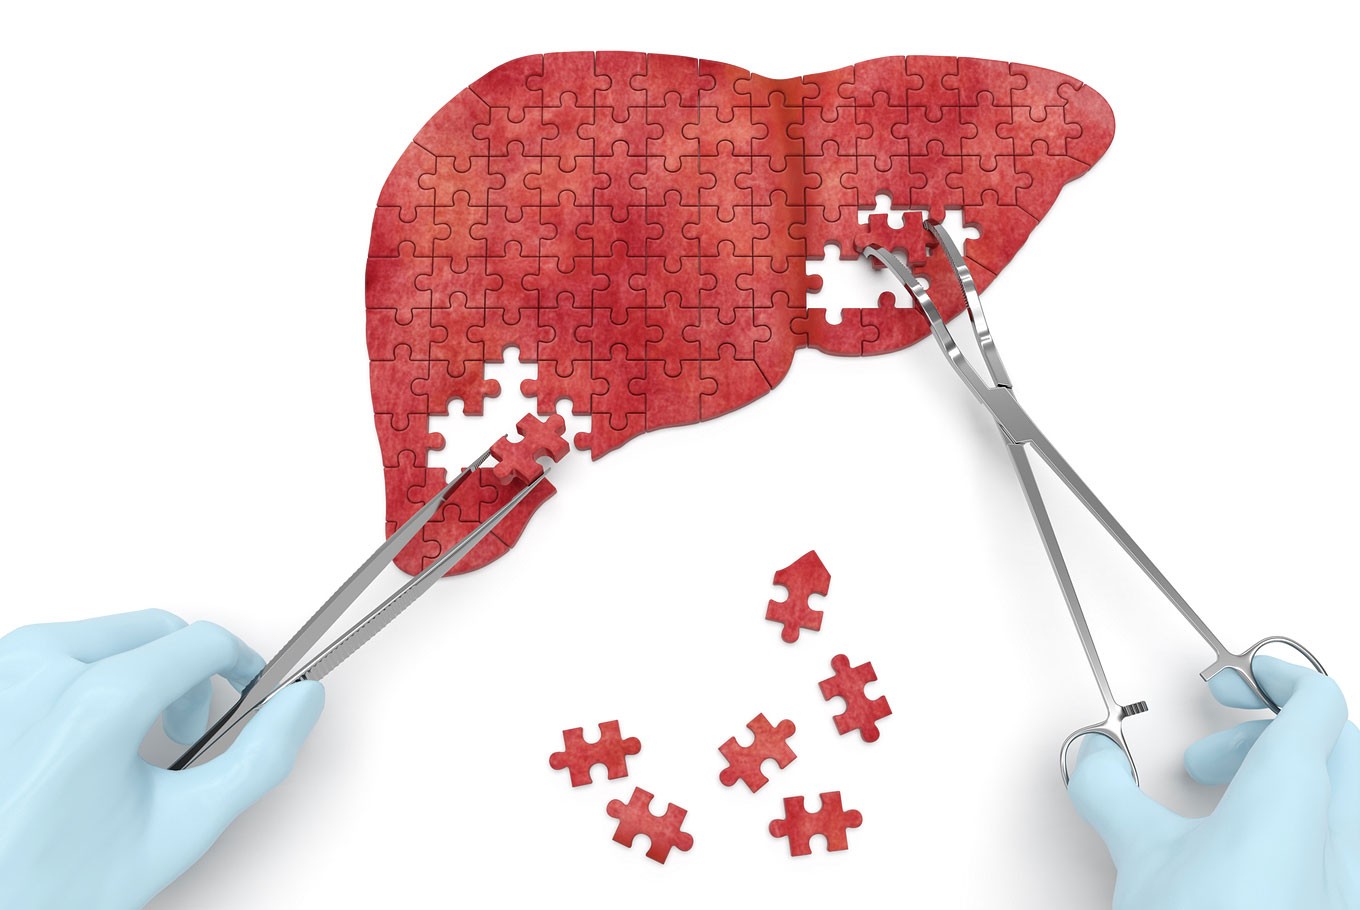 New insights on liver injury in men taking body